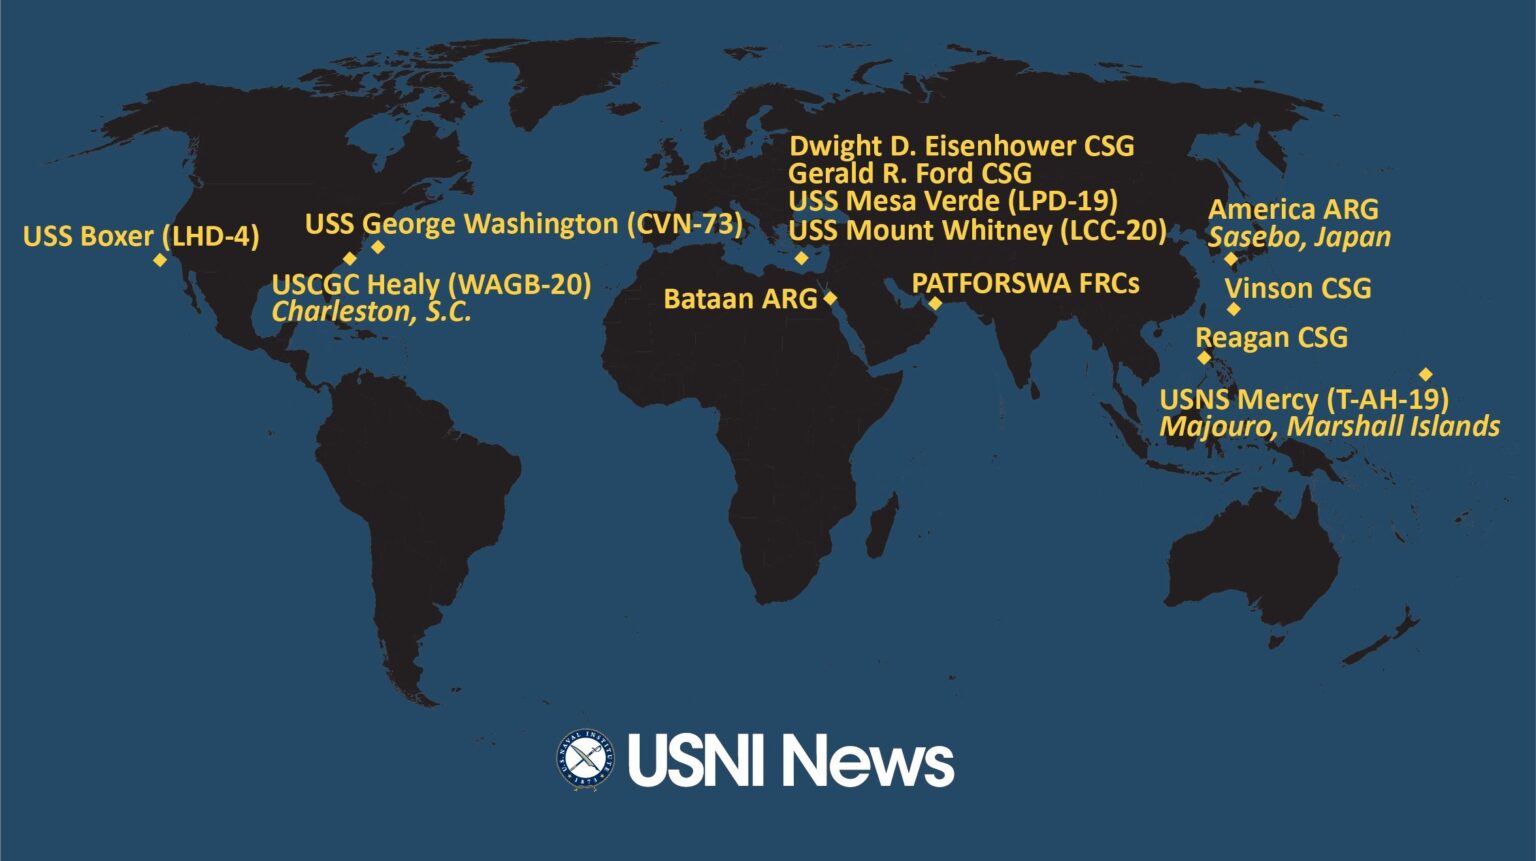 Main news thread - conflicts, terrorism, crisis from around the globe FT_11_02_23-1536x861